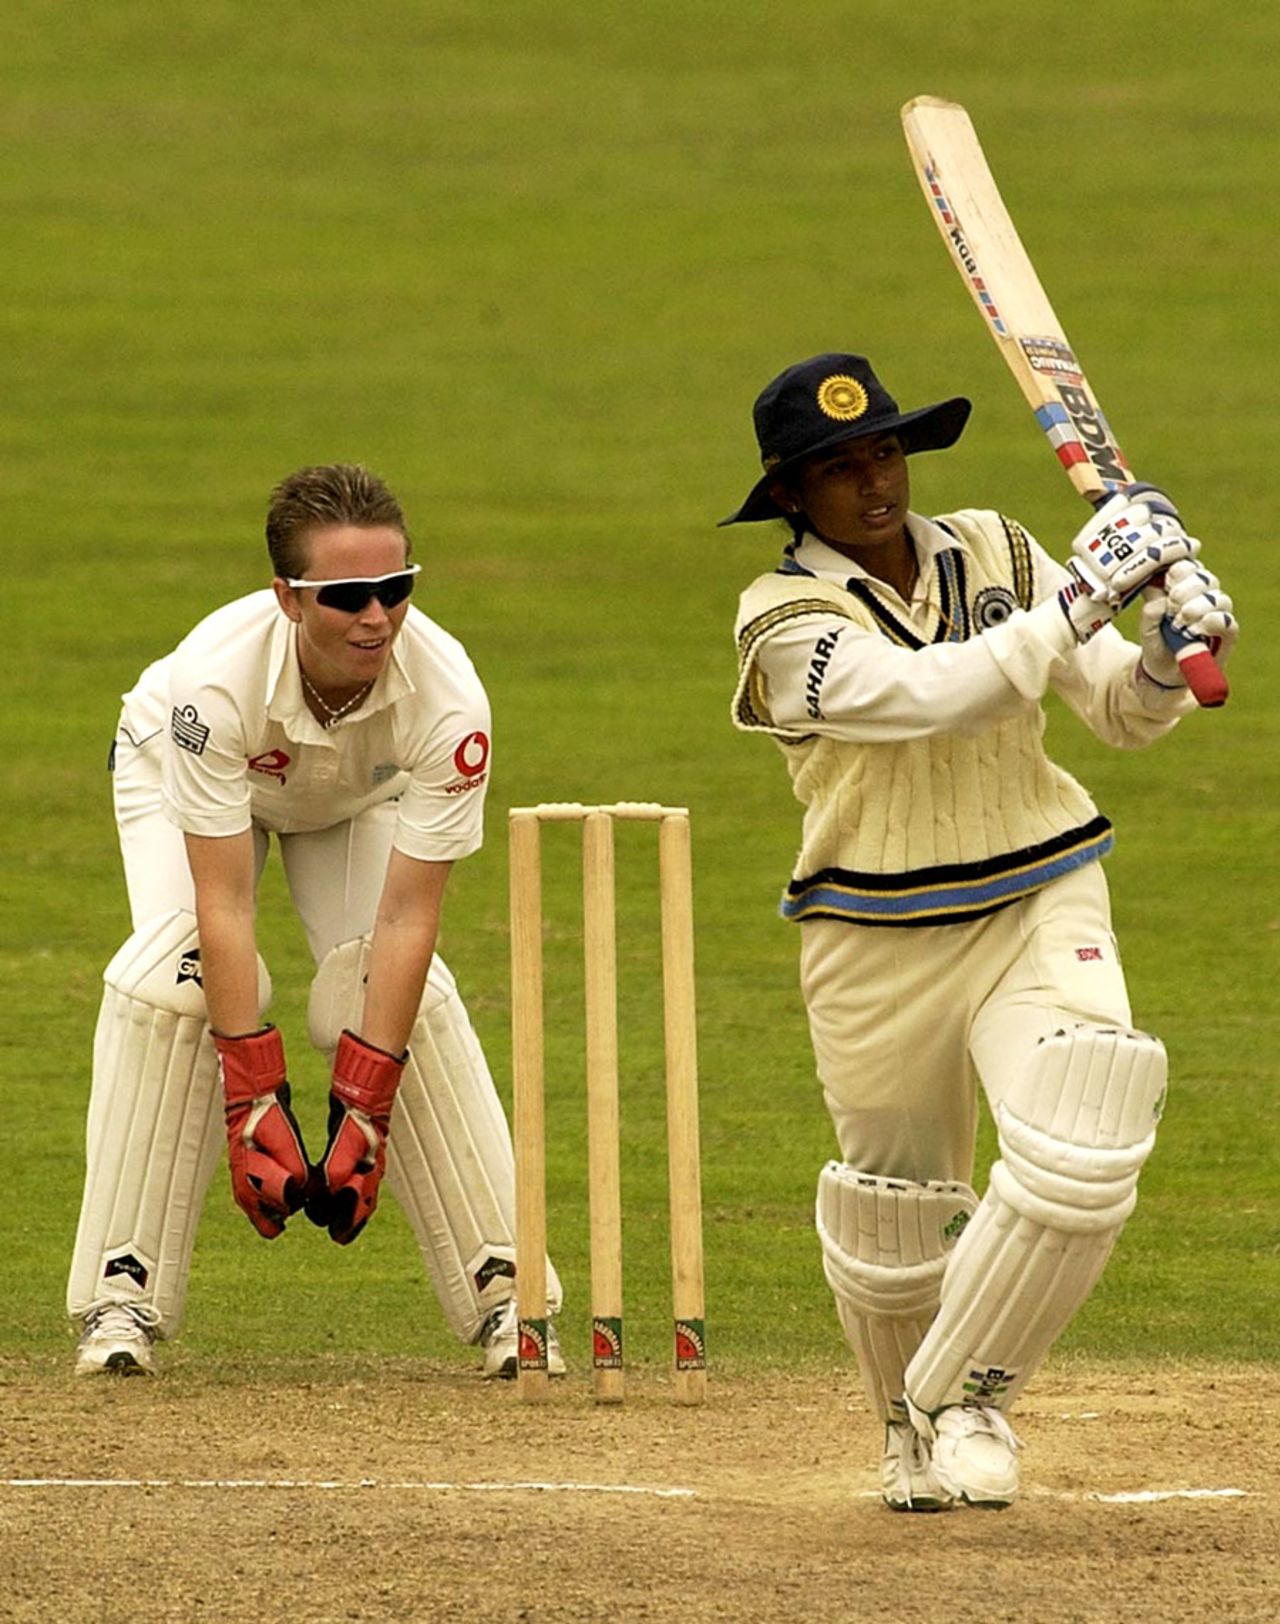 Mithali Raj plays a shot on her way to 214, England Women v India Women, 2nd Test, Taunton, 3rd day, August 16, 2002